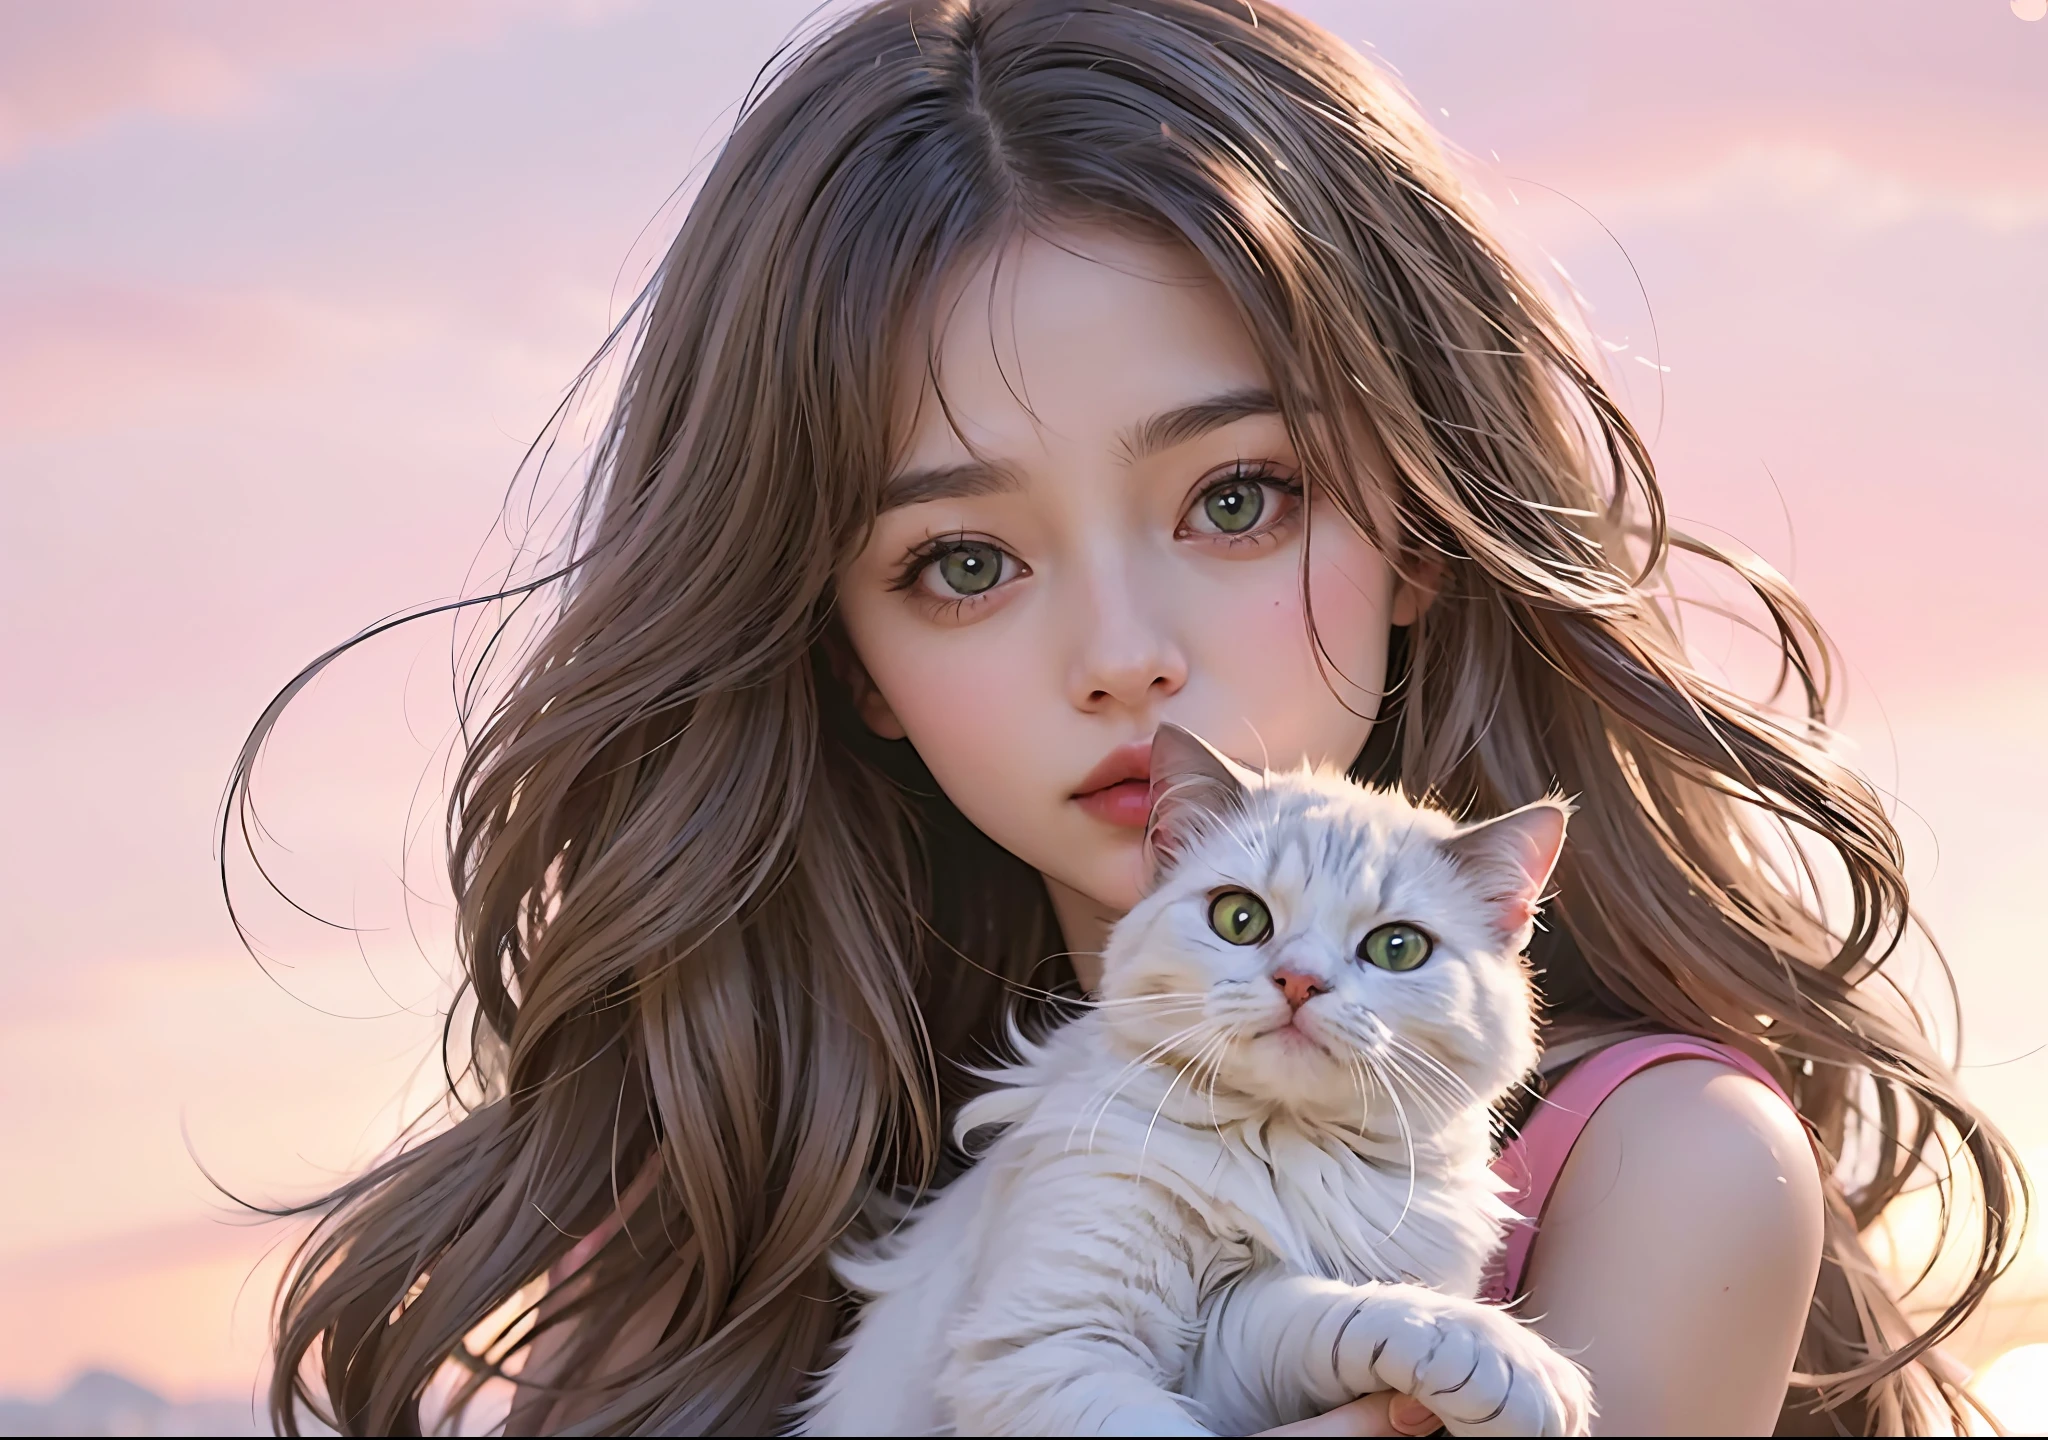 anime 소녀 with long hair holding a 하얀색 고양이 in her arms, very beautiful cute 고양이소녀, beautiful anime 고양이소녀, cute anime 고양이소녀, 구웨이즈, very beautiful anime 고양이 소녀, 귀여운 아트 스타일, beautiful young 고양이소녀, 하얀색 ( 고양이 ) 소녀, attractive 고양이 소녀, artwork in the style of 구웨이즈, 하얀색 고양이 소녀, anime 고양이소녀